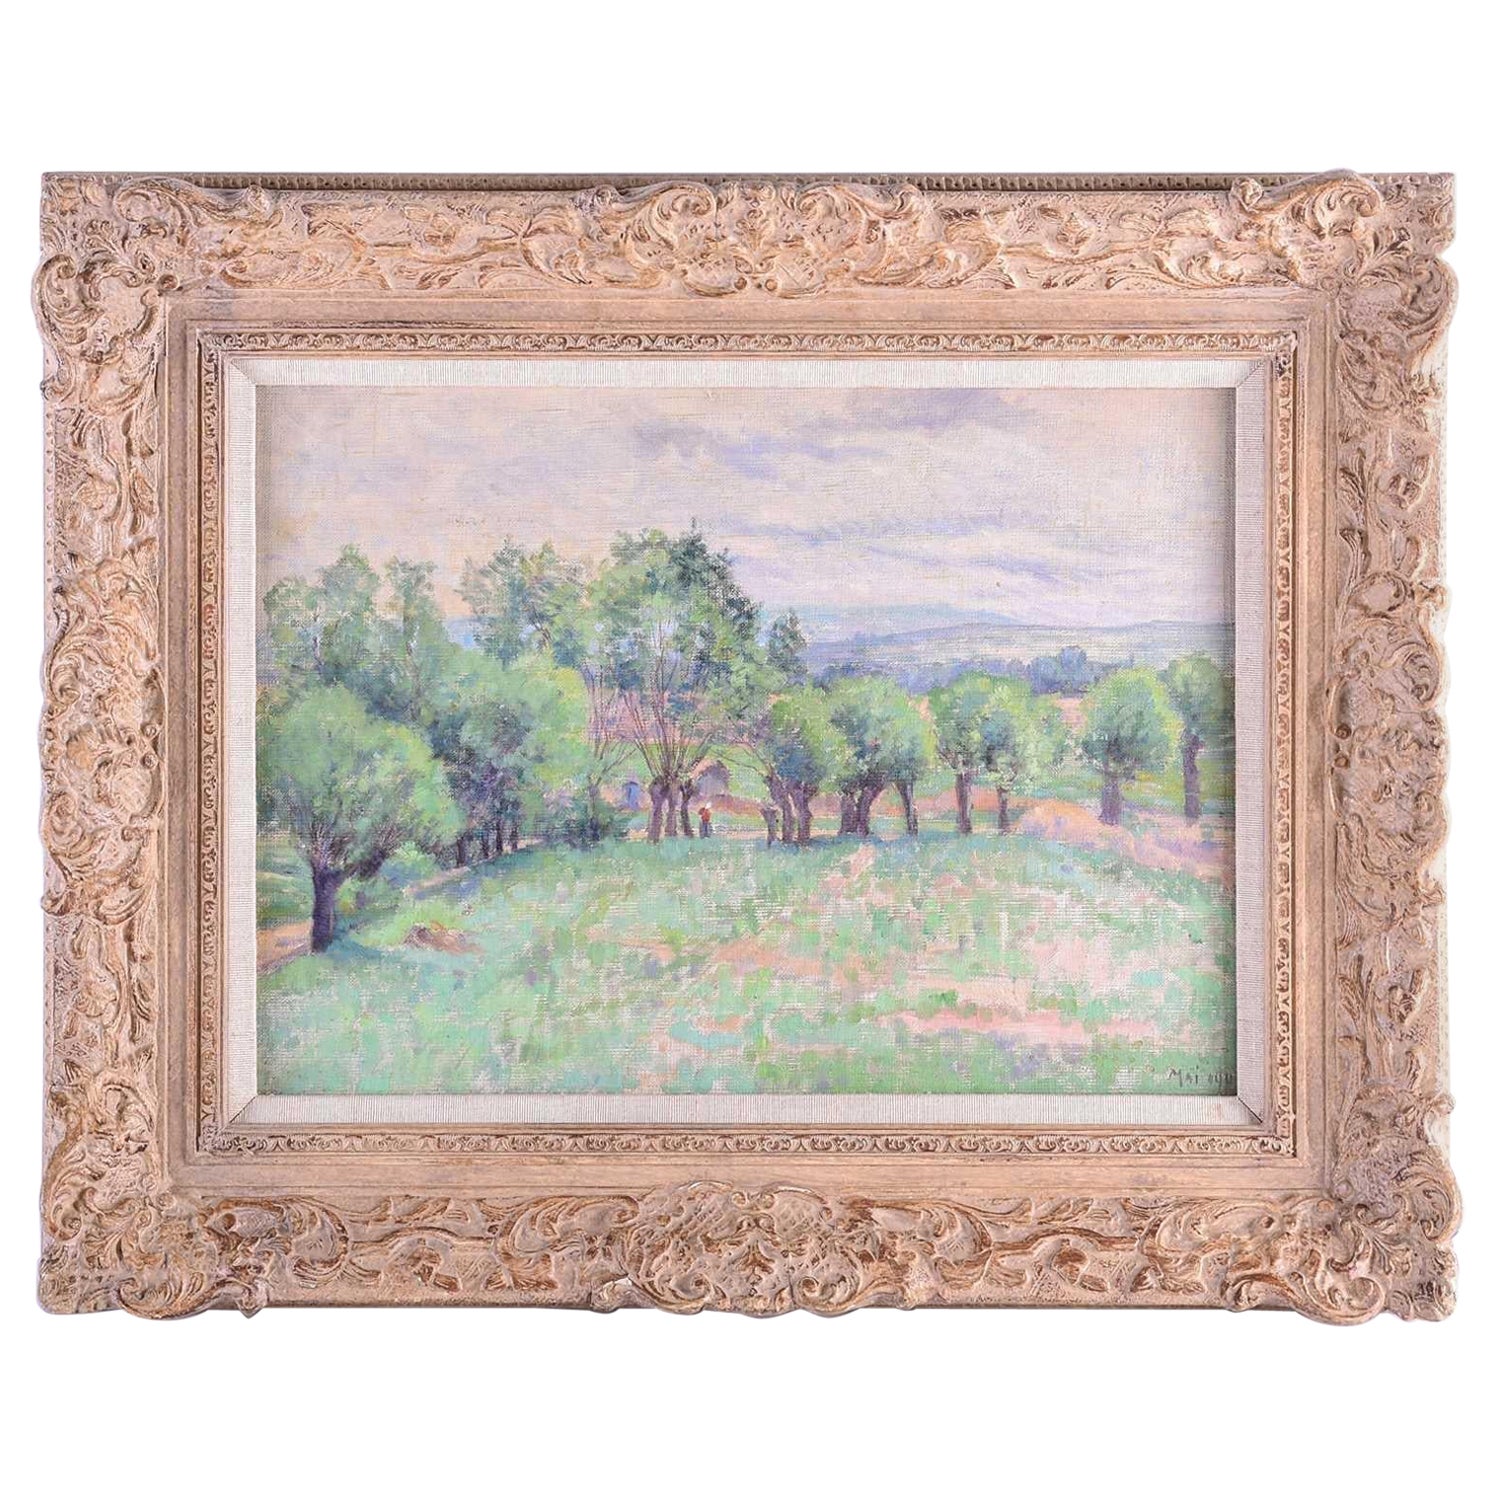 (follower of) Camille Pissarro Figurative Painting - 1890's French Impressionist Oil Painting Lady Walking Country Landscape Fields